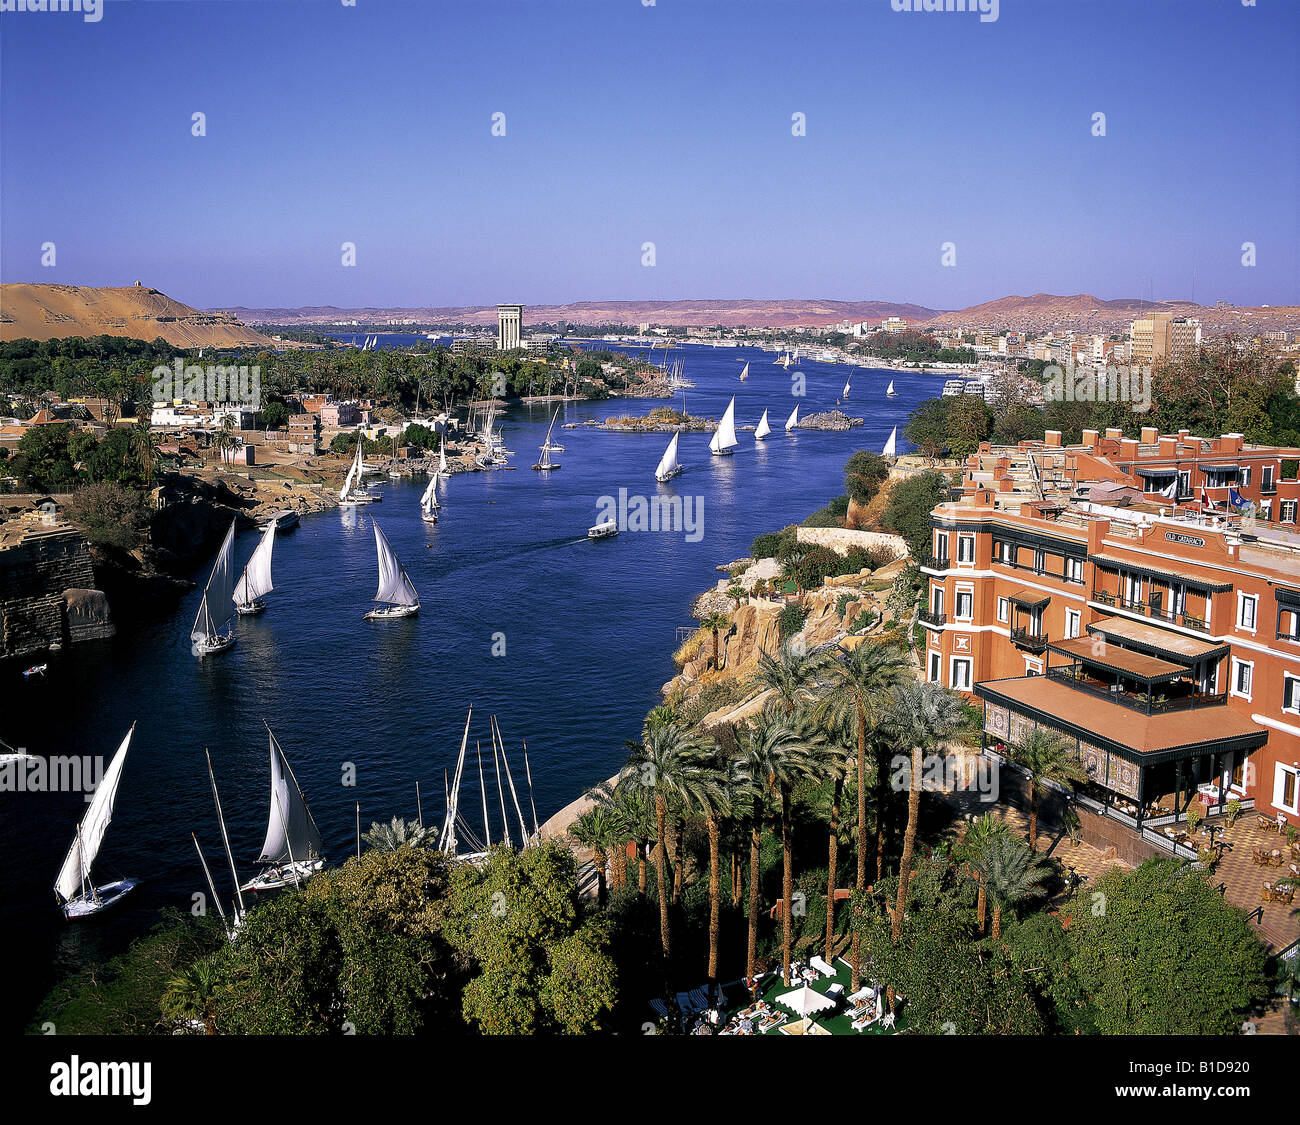 Old Cataract Hotel and feluccas on the Nile at Aswan Egypt Stock Photo